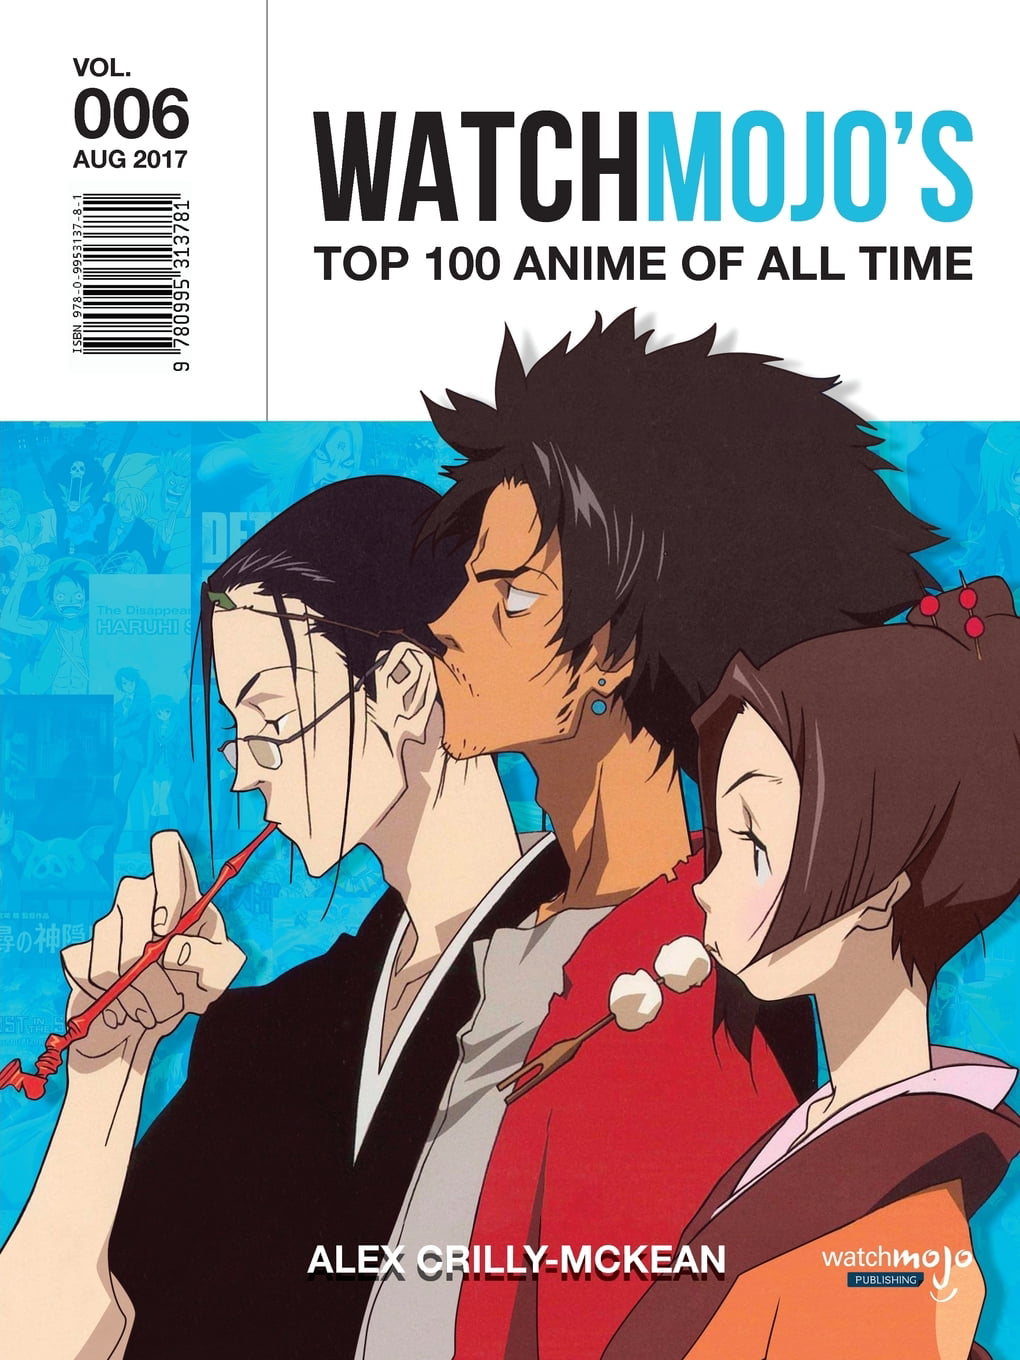 Share more than 72 anime at walmart best - in.cdgdbentre